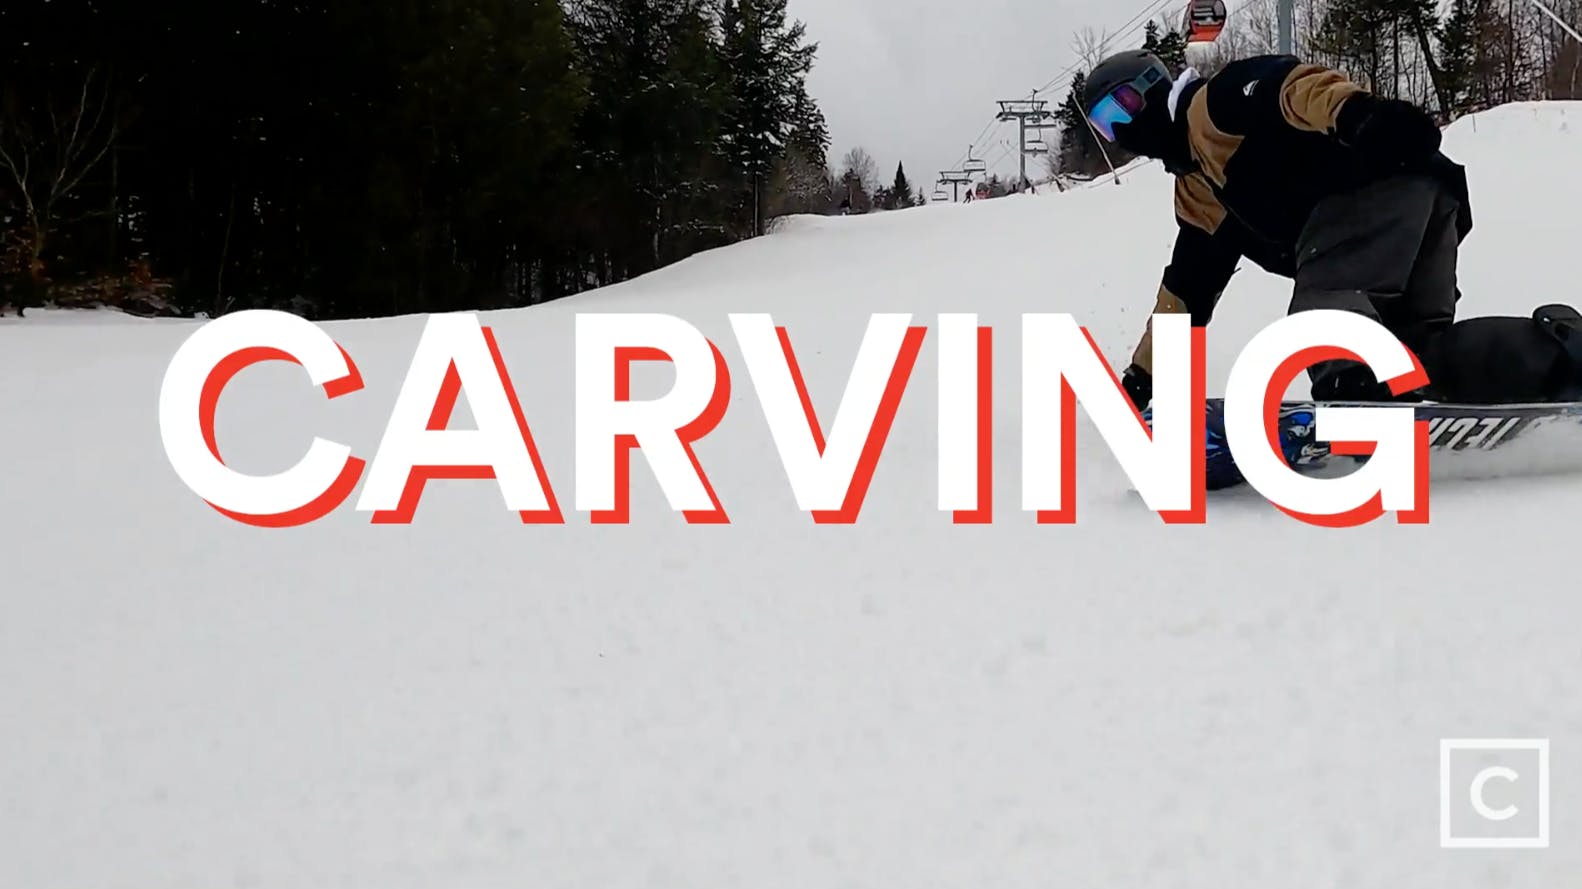 Curated expert Colby Henderson on the slope with a "Carving" graphic over the image